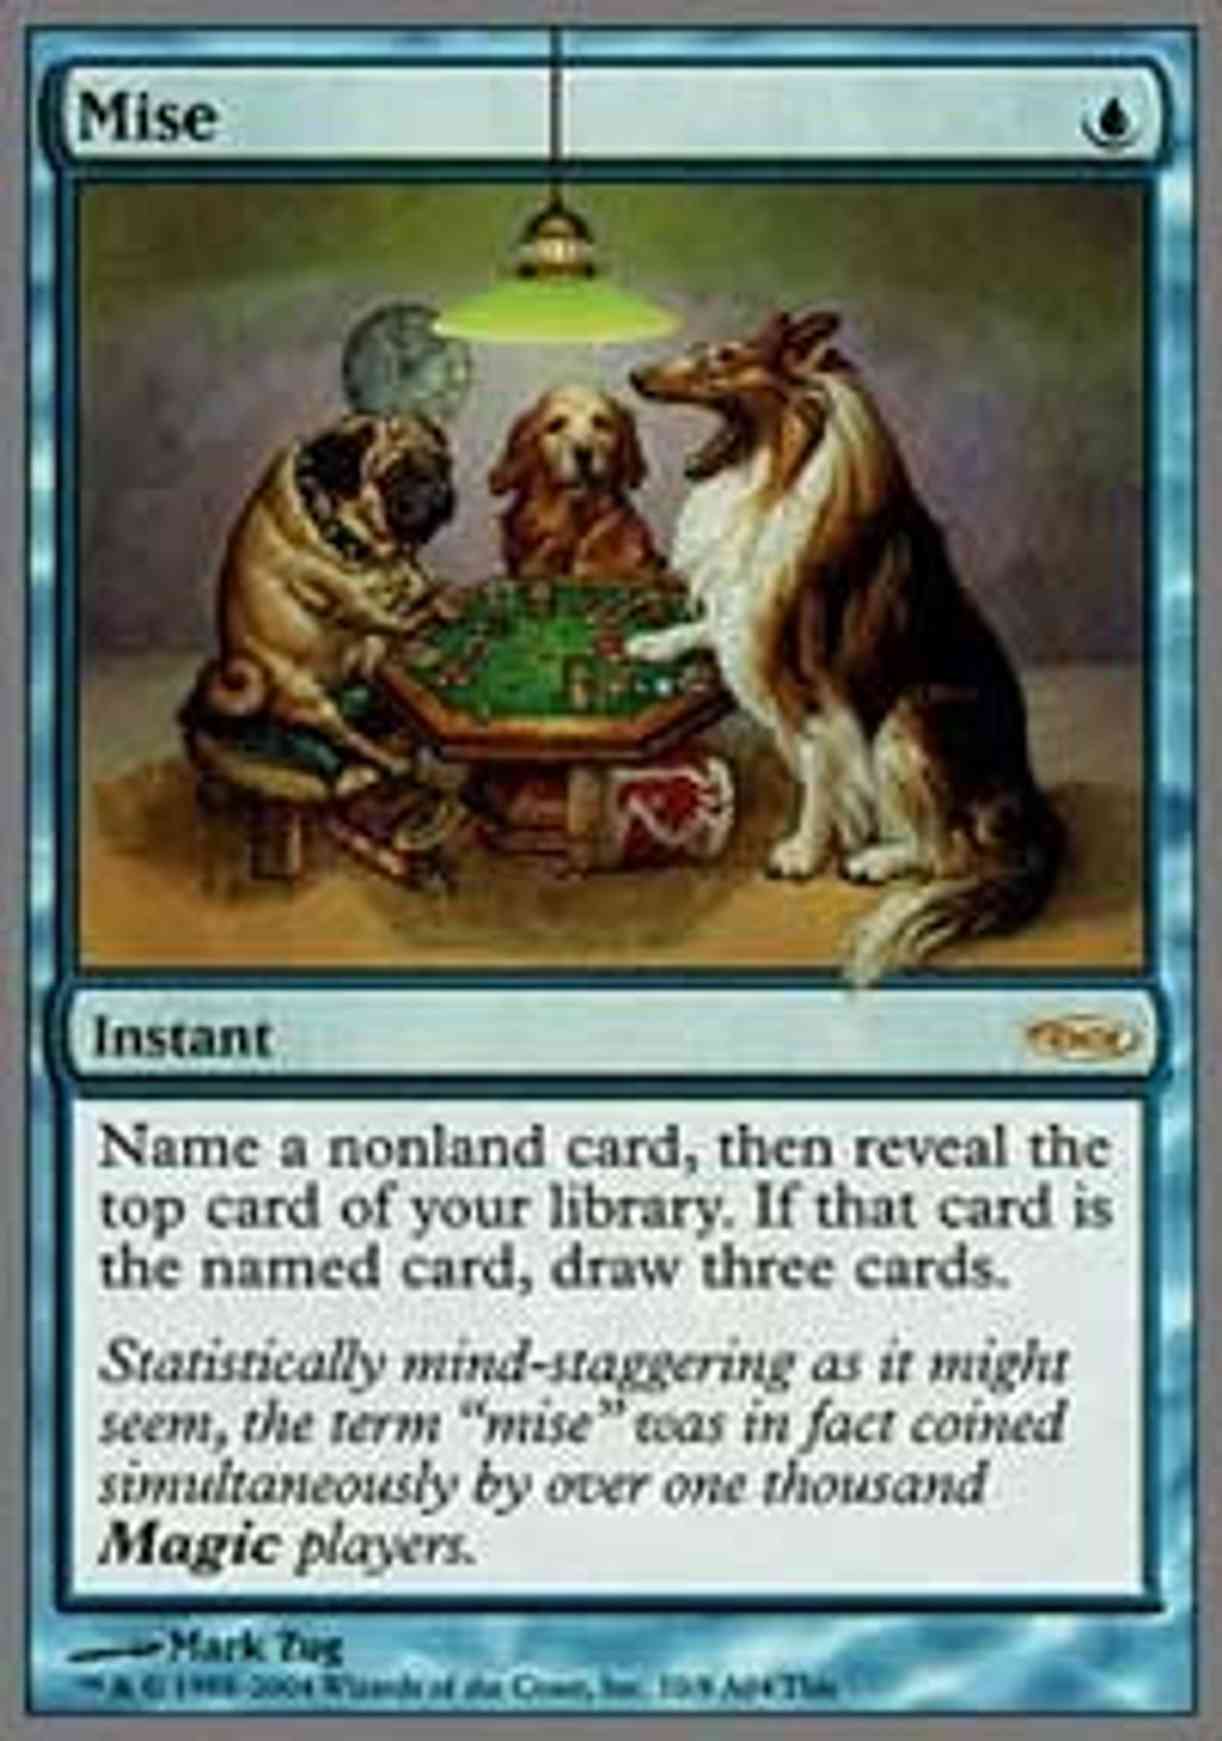 Mise magic card front